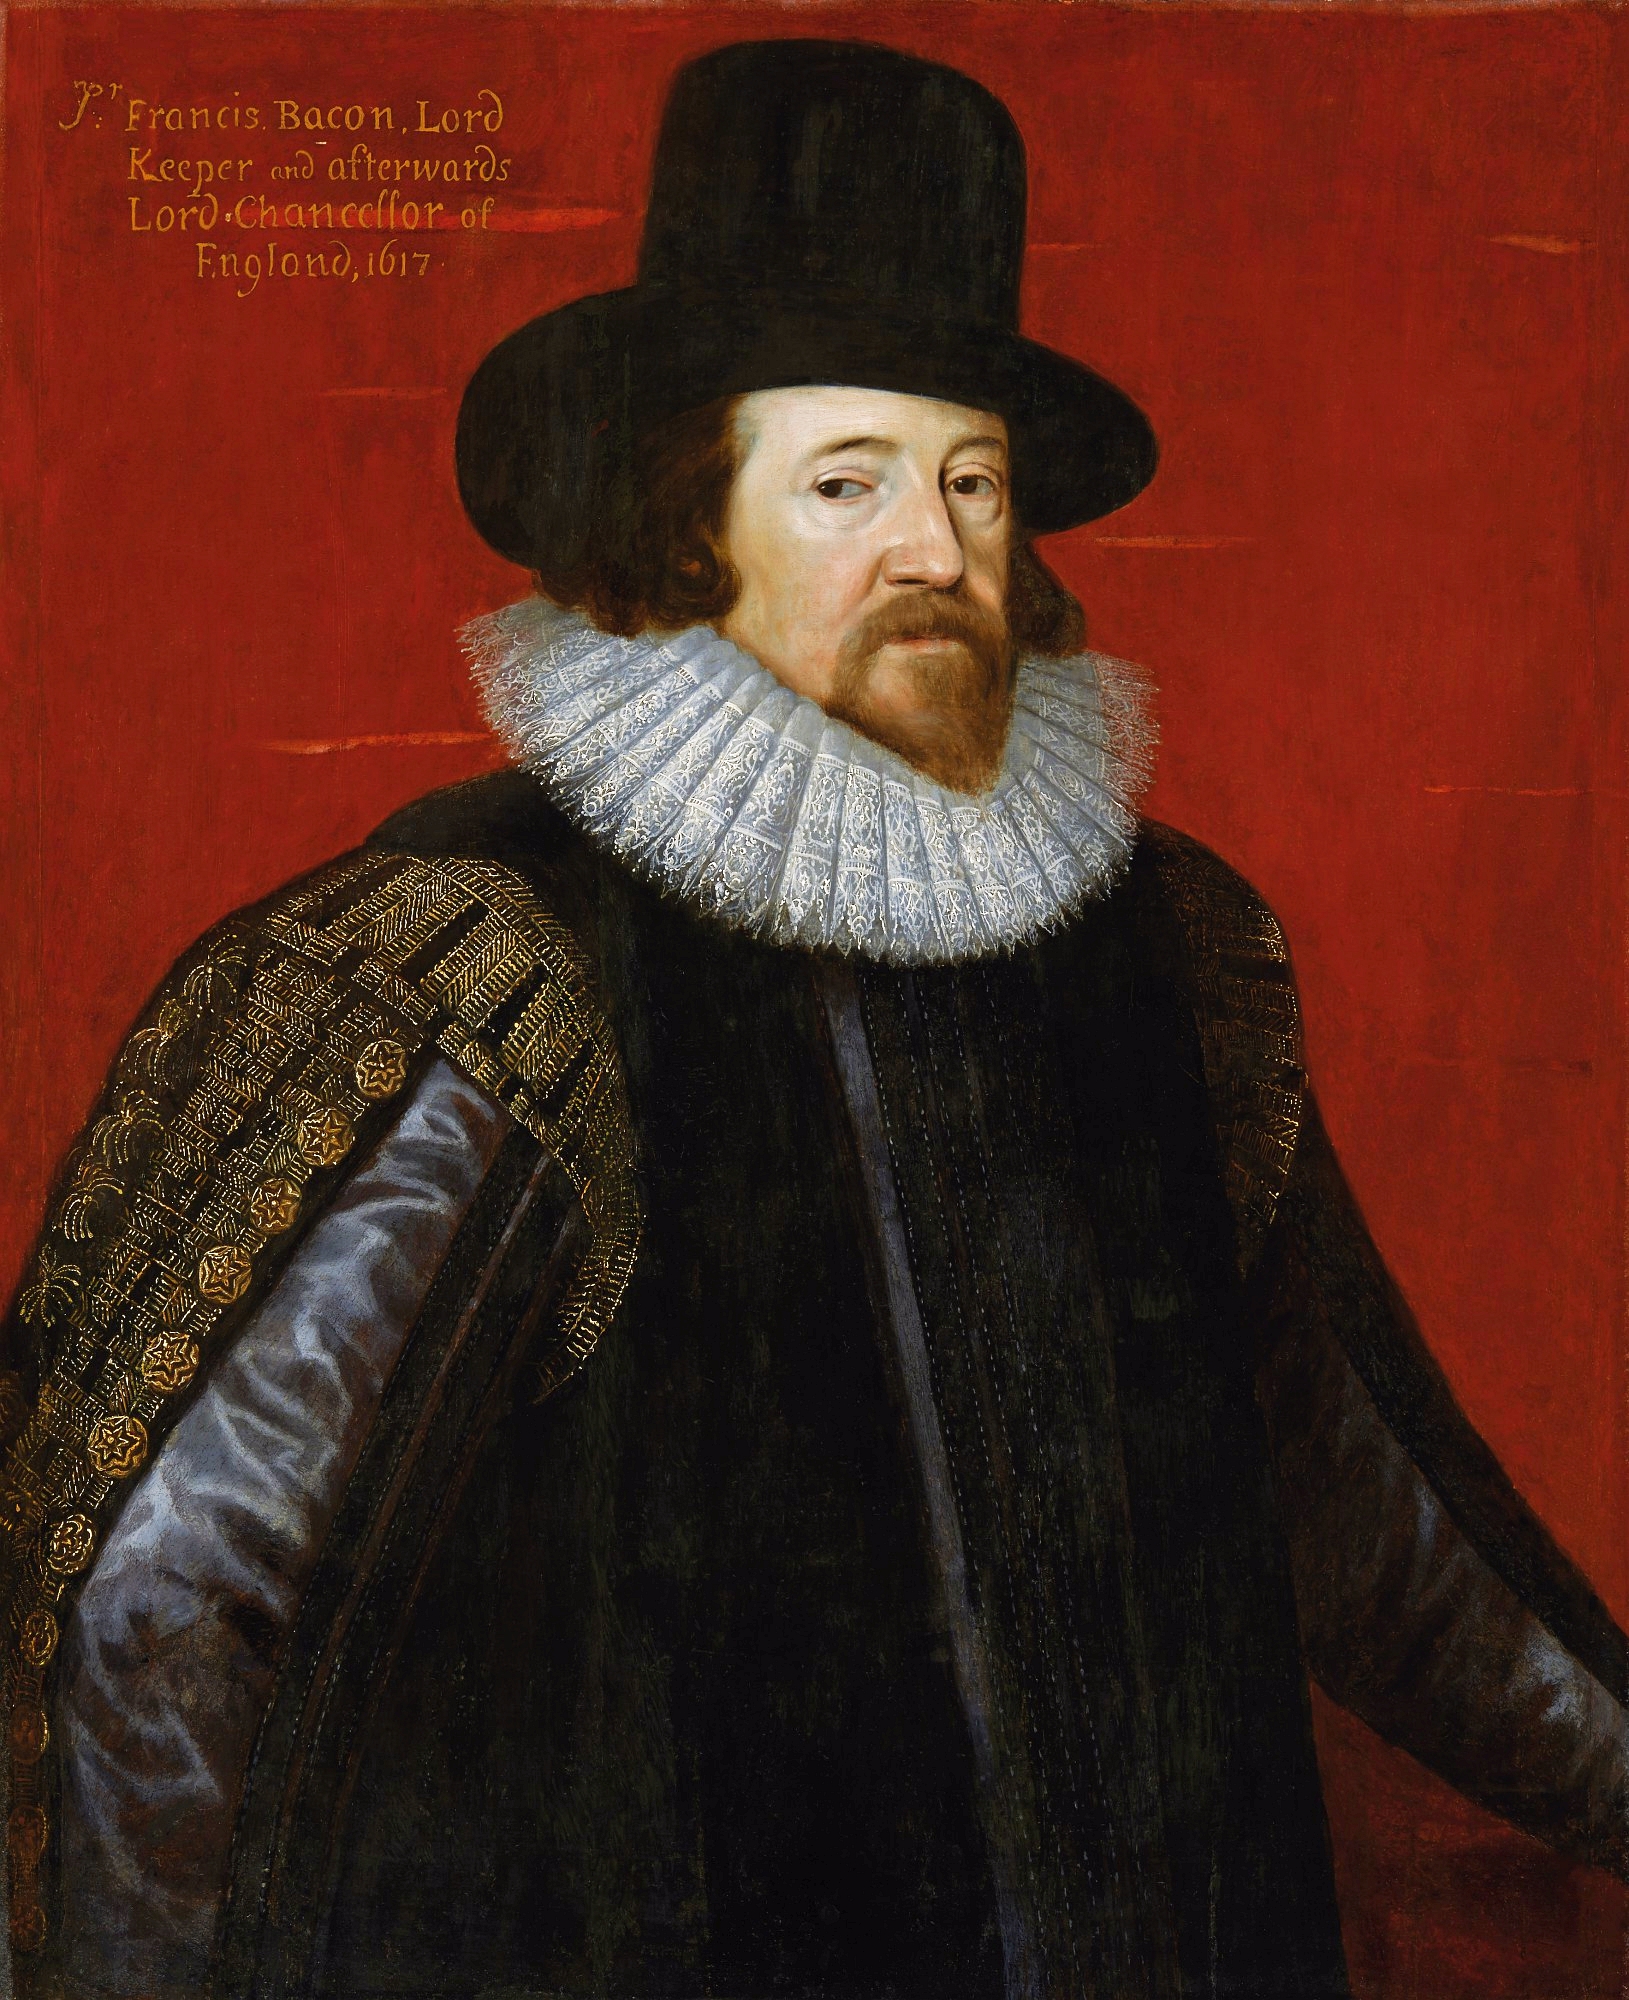 Painted portrait of a white man with a pointed brown beard. He wears rich clothing typical of 1600s Britain.